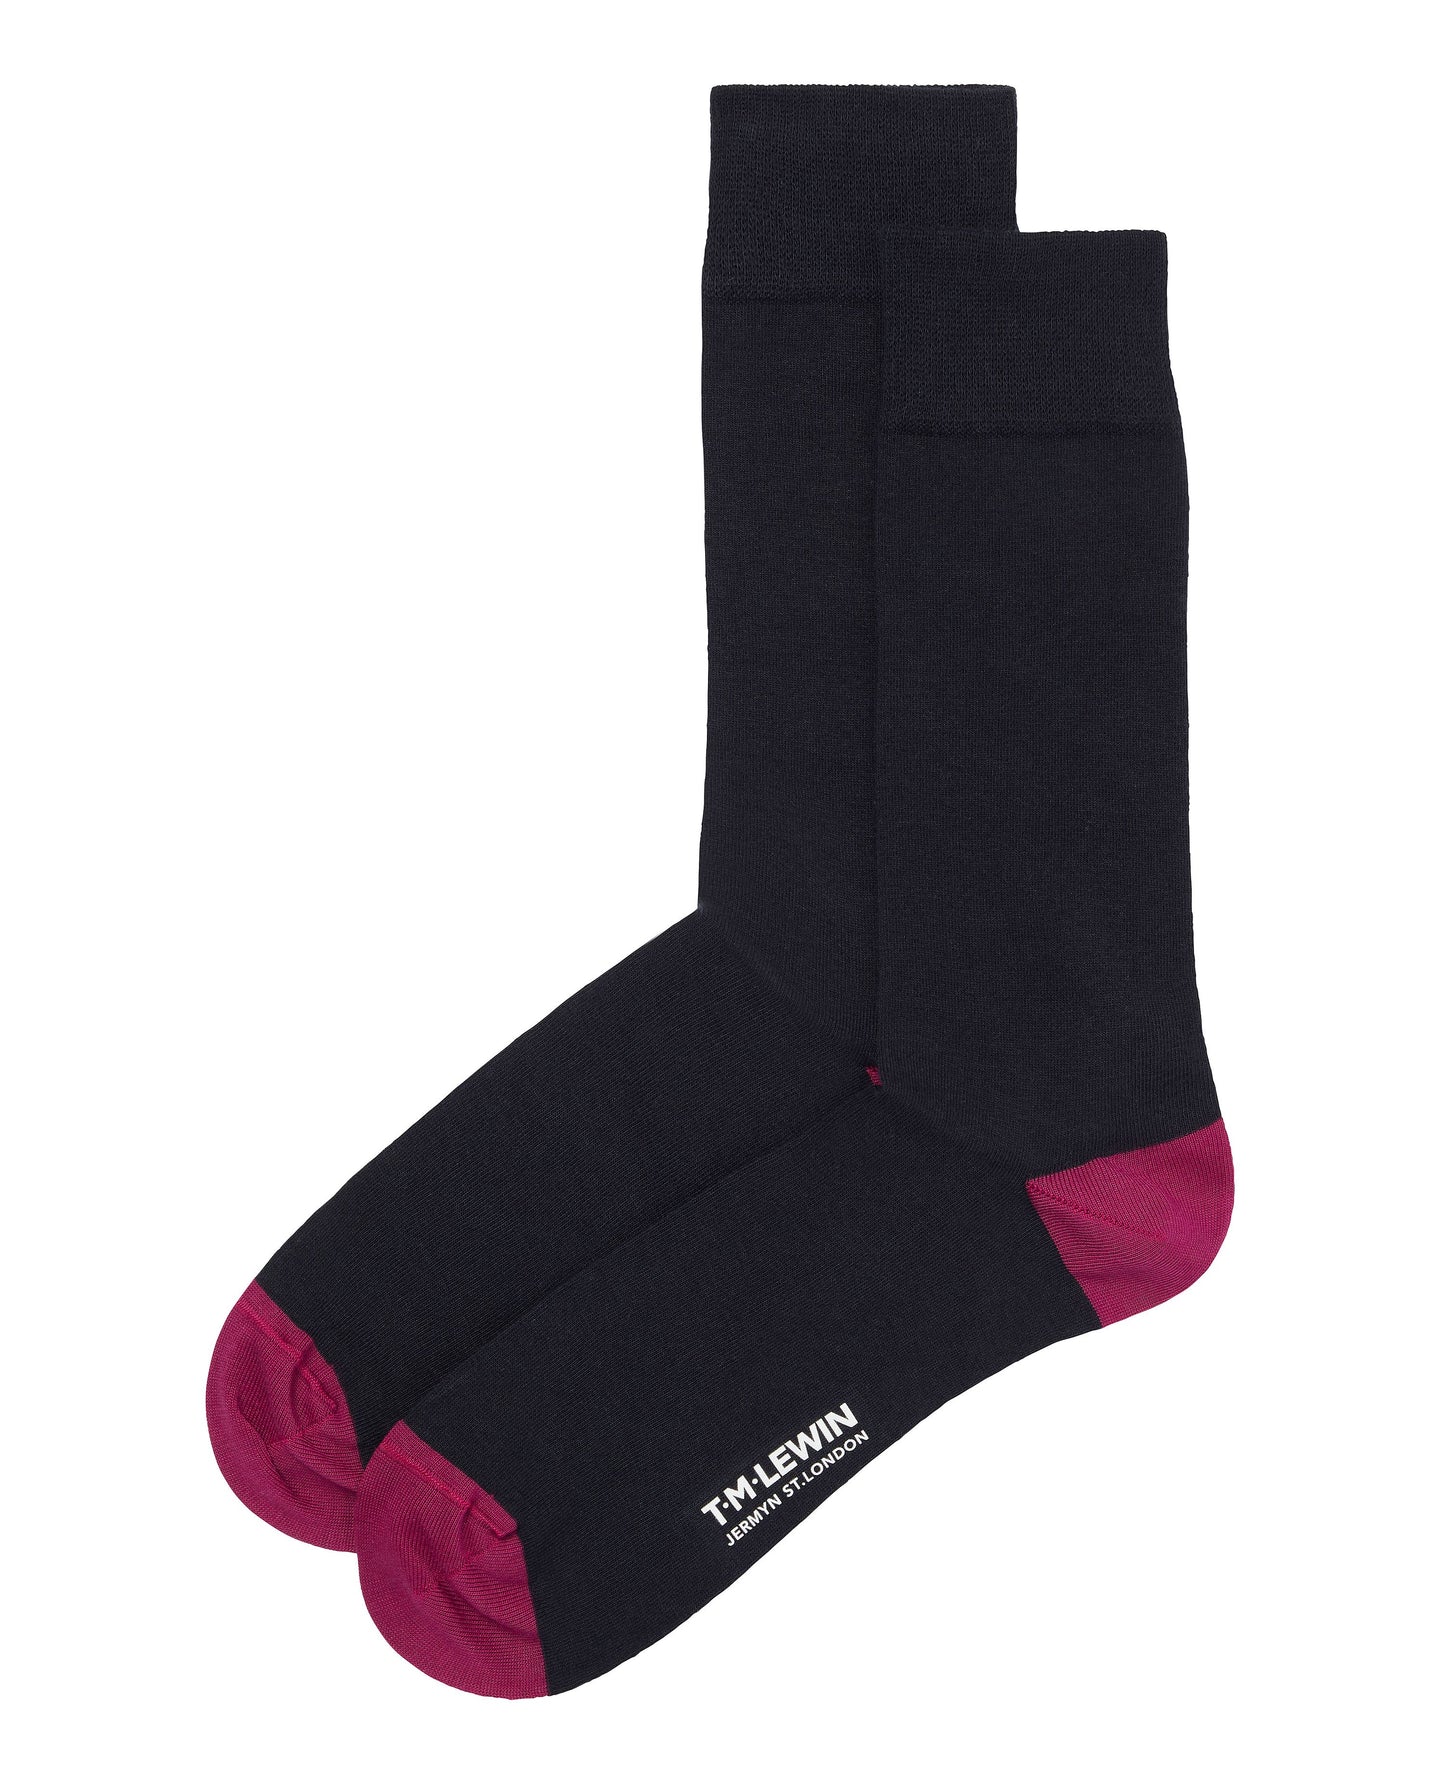 Image 6 of Navy Contrast Heel and Toe 5 Pack Sock Set